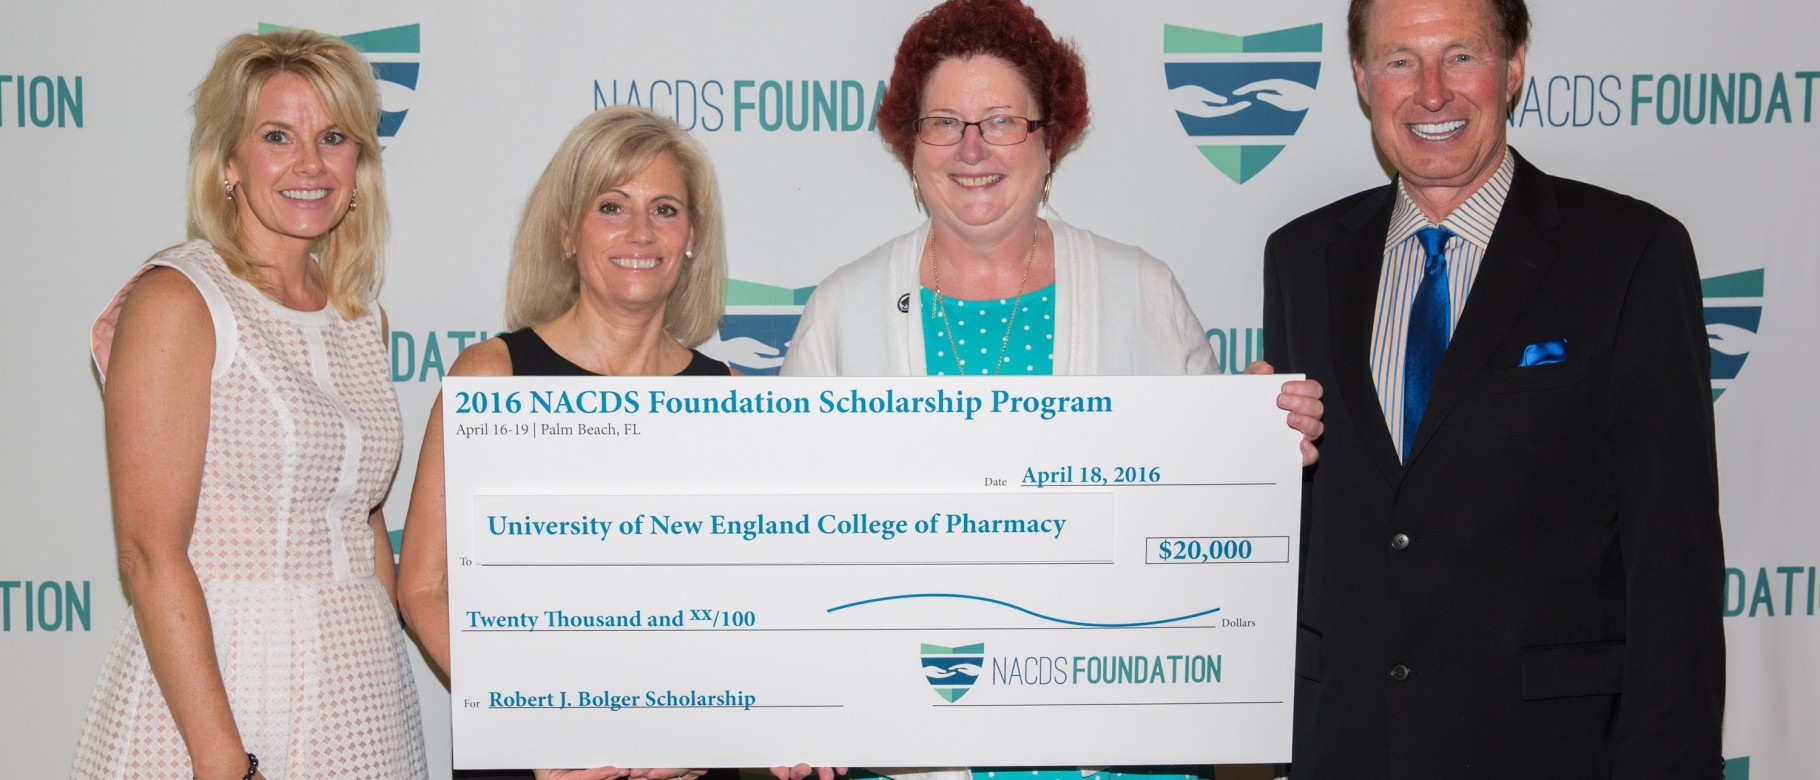 Gayle Brazeau, Ph.D., dean of the College of Pharmacy, accepts the NACDS Foundation Scholarship